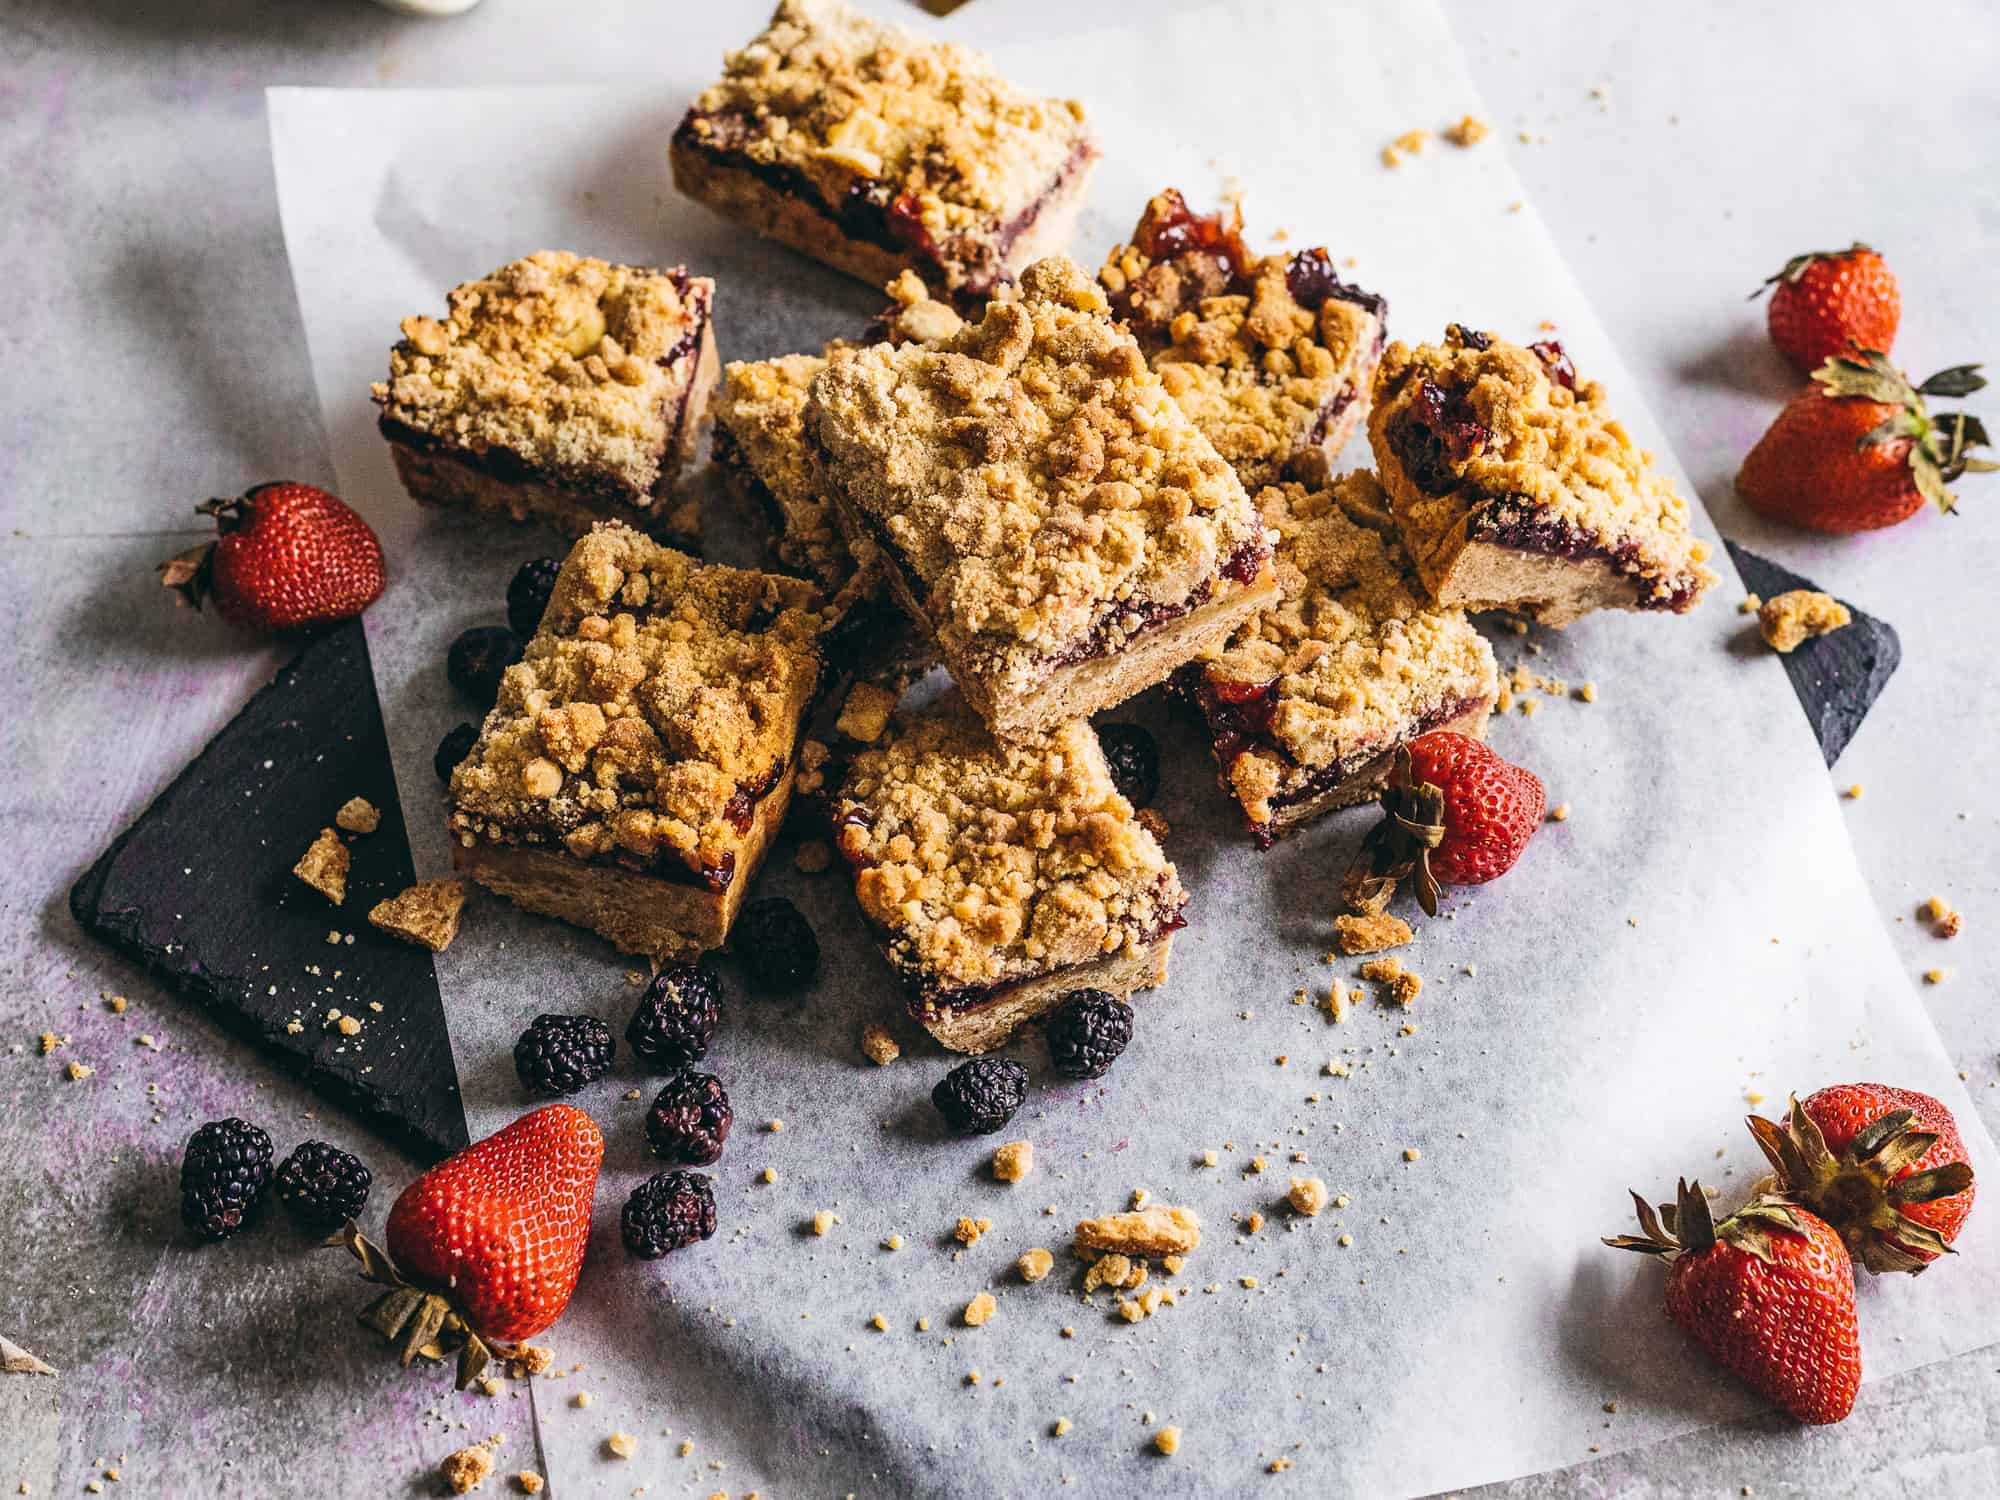 mixed Berry Crumble Bars stacked on top of each other